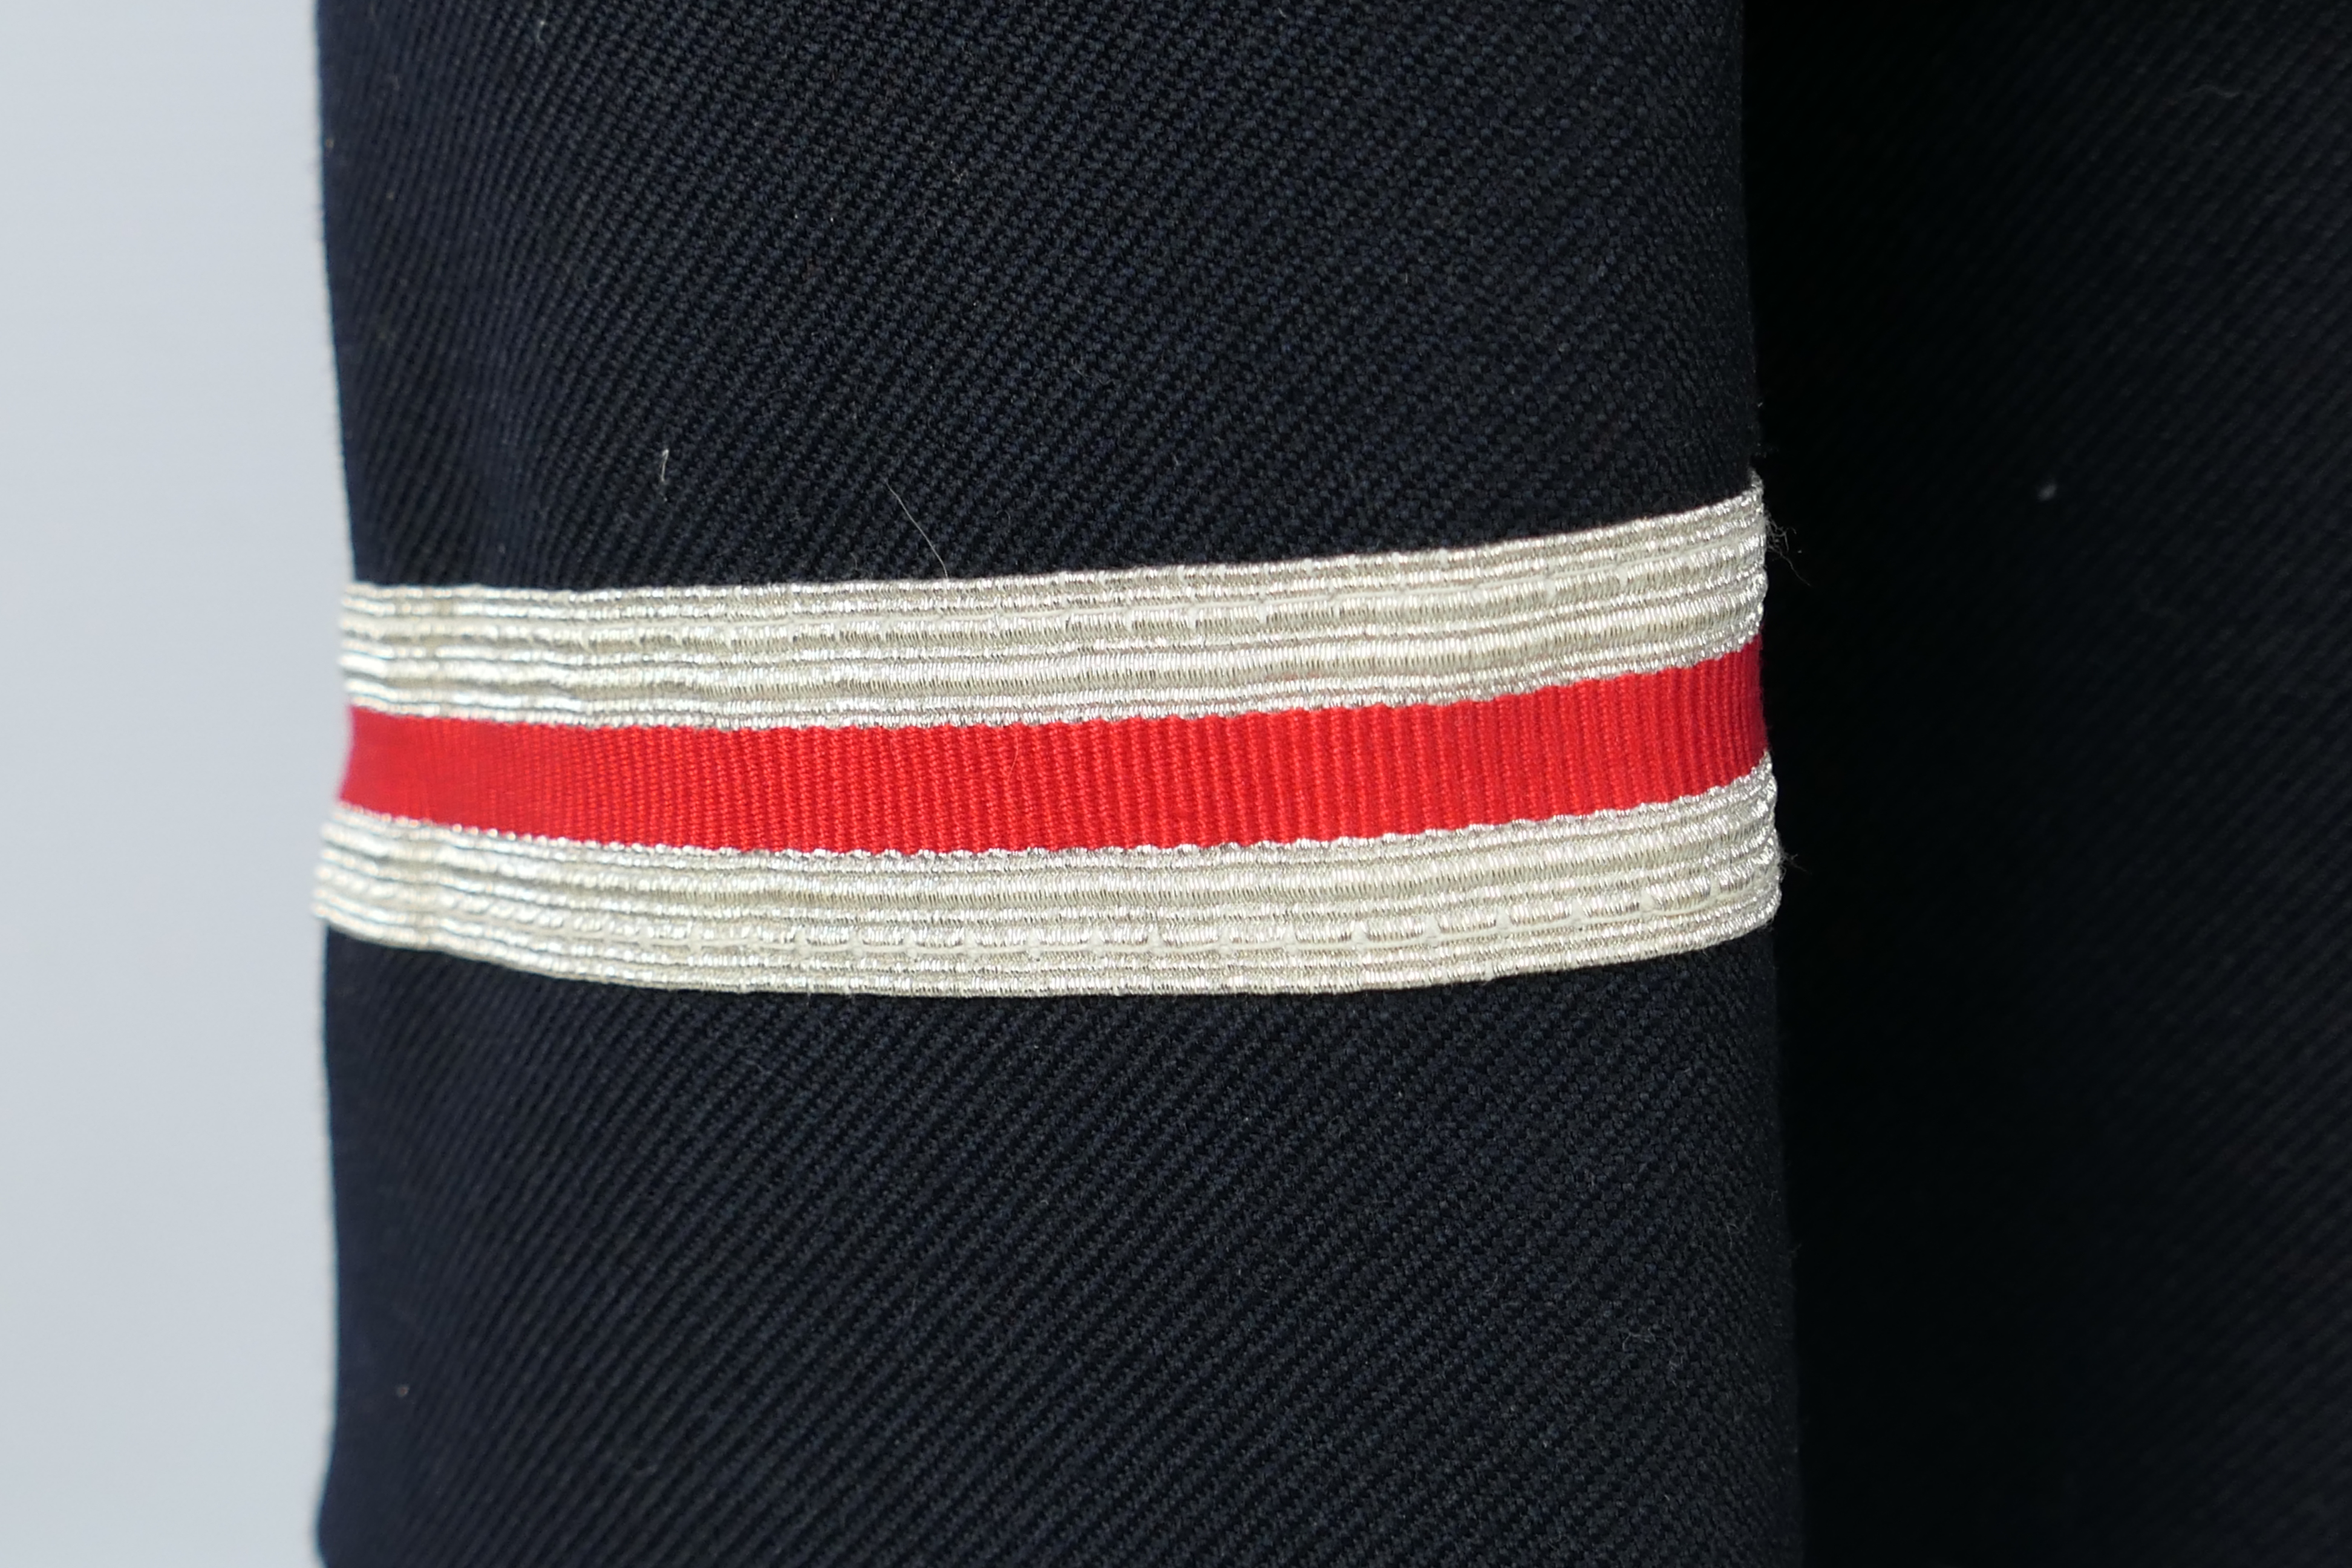 A vintage British Rail jacket with insignia and buttons and a hallmarked silver and enamel lapel - Image 3 of 7